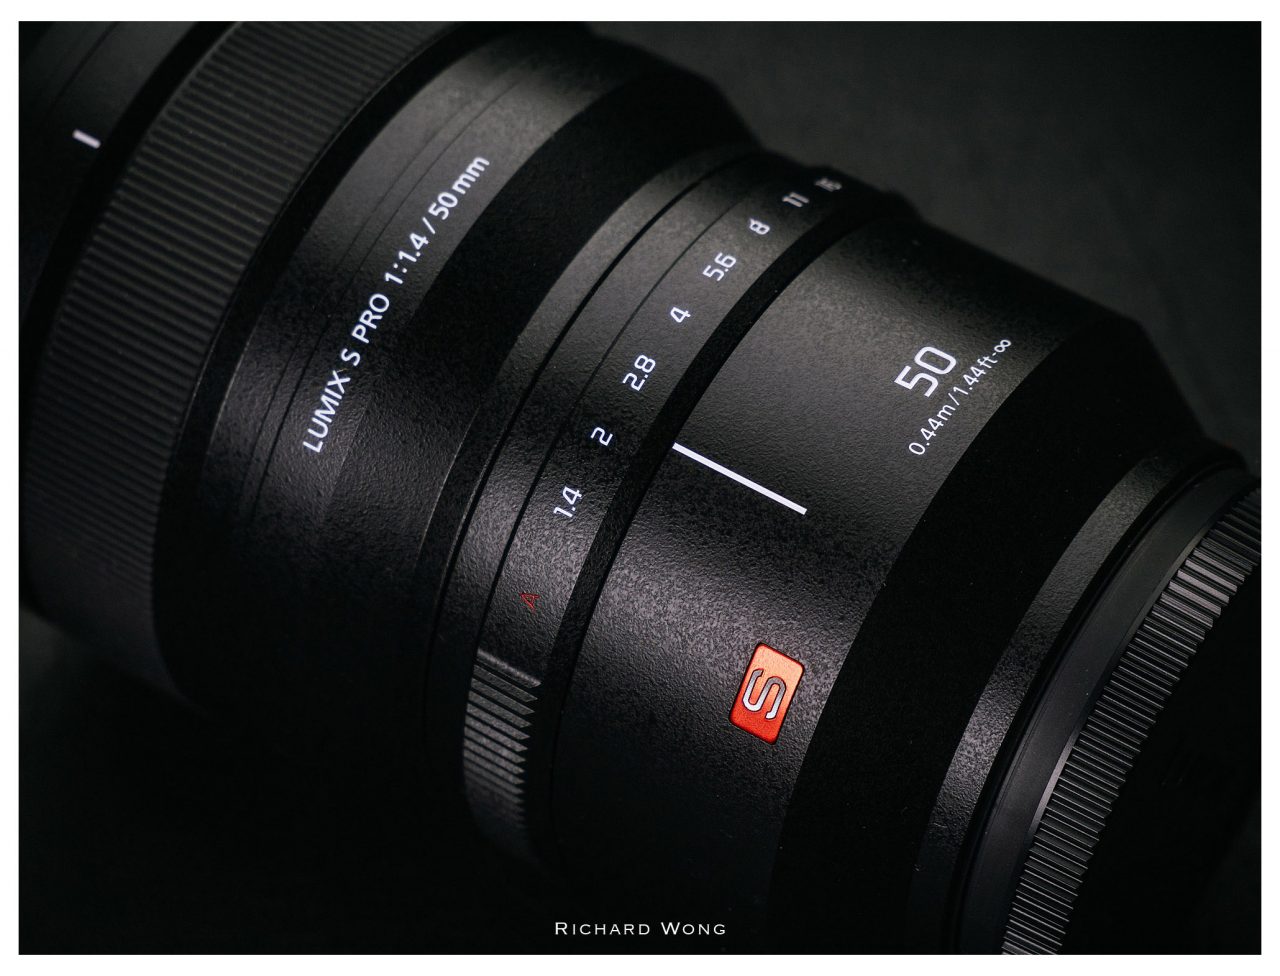 houding Waardig stilte Panasonic Lumix S Pro 50mm f/1.4 Review – Review By Richard